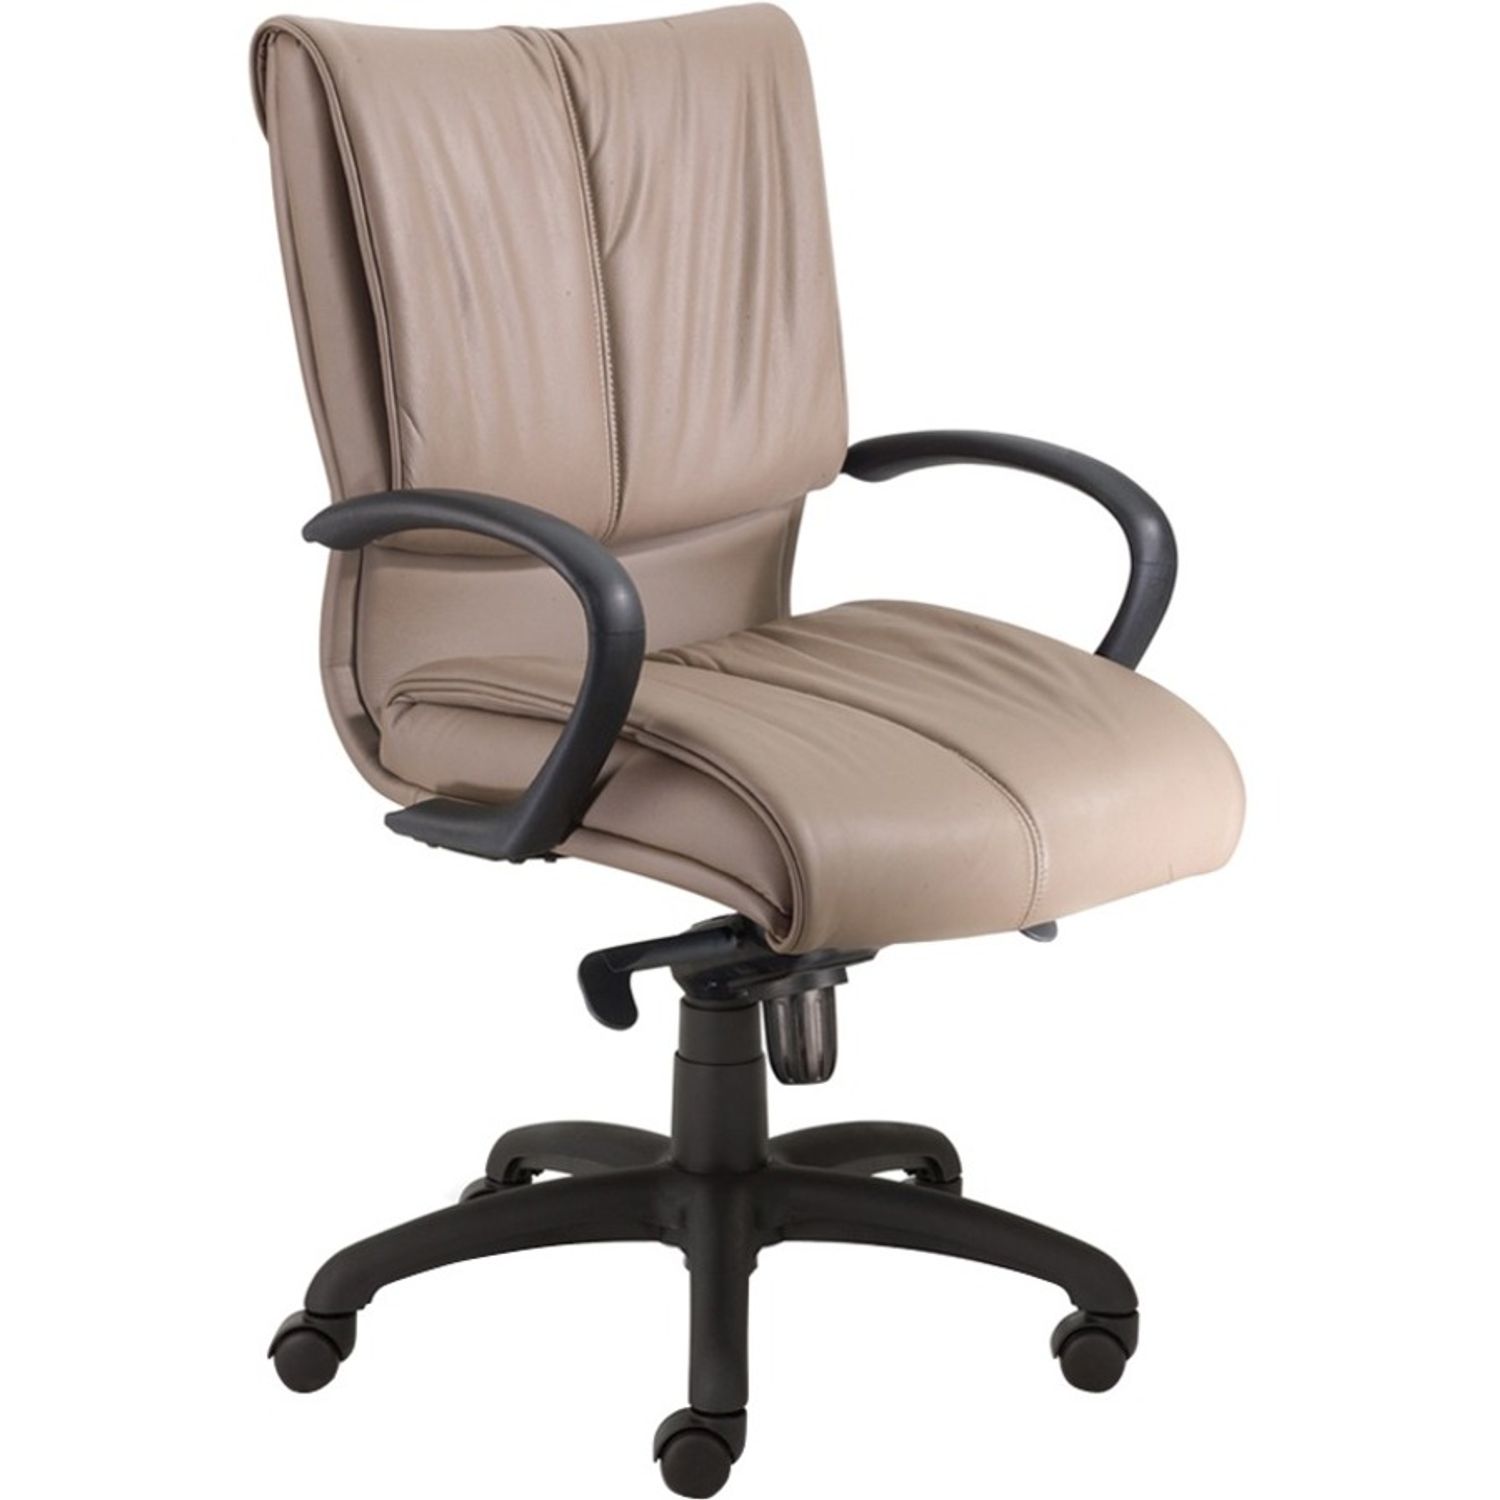 Mid-Back Executive & Conference Seating Baltic Top Grain Leather Seat, Baltic Top Grain Leather Back, Mid Back, 5-star Base, 1 Each